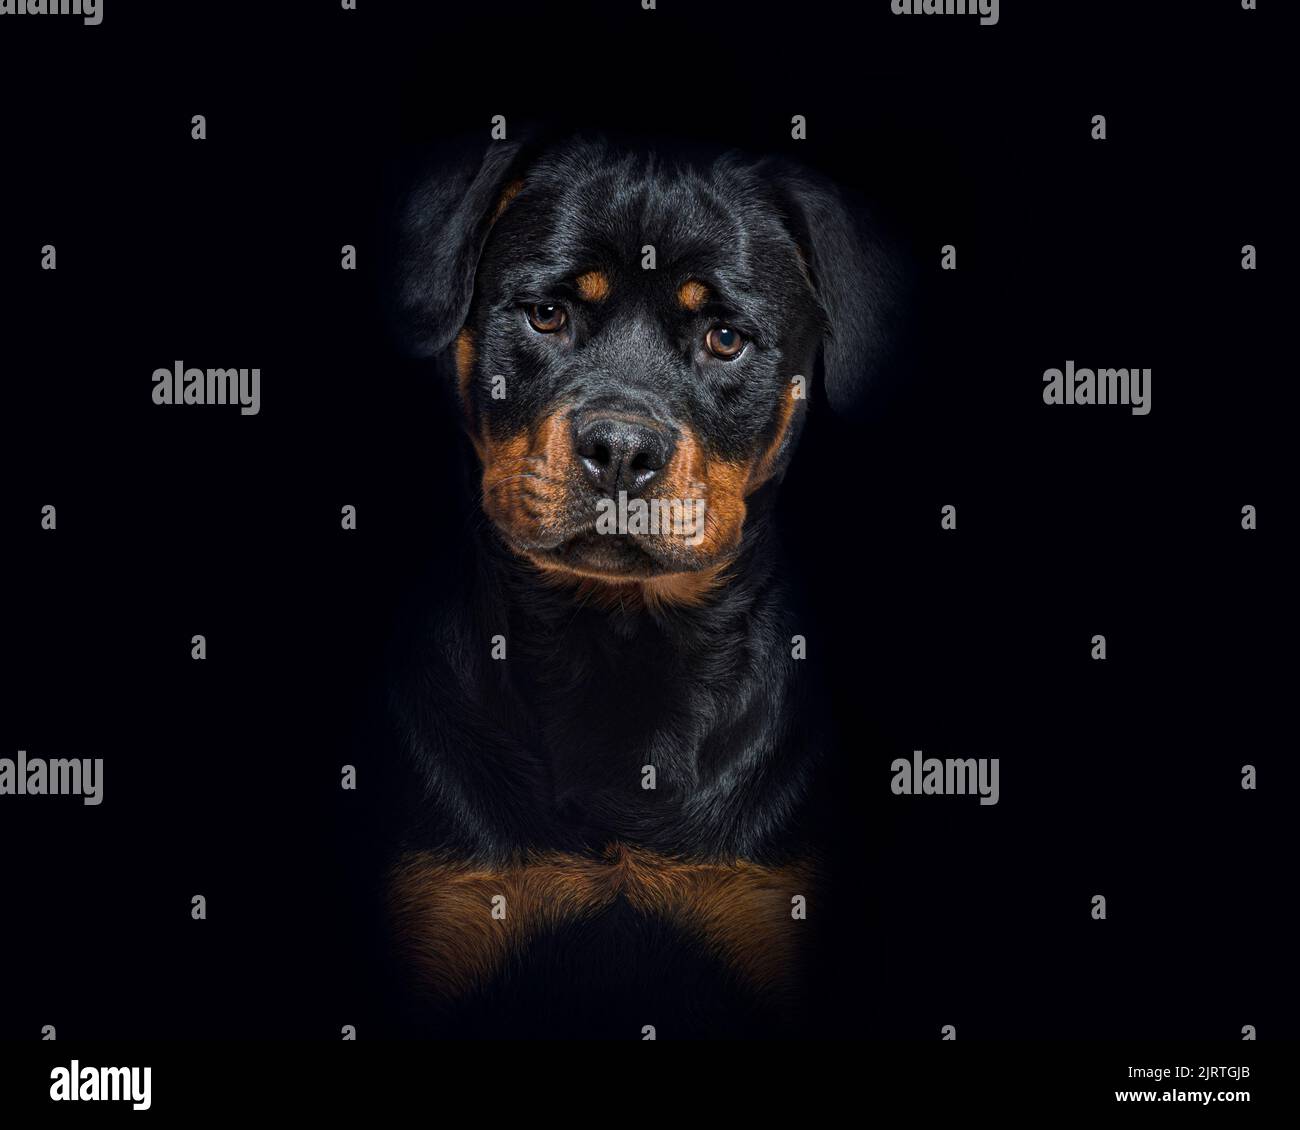 Portrait of a Black and tan Young Rottweiler on black background Stock Photo